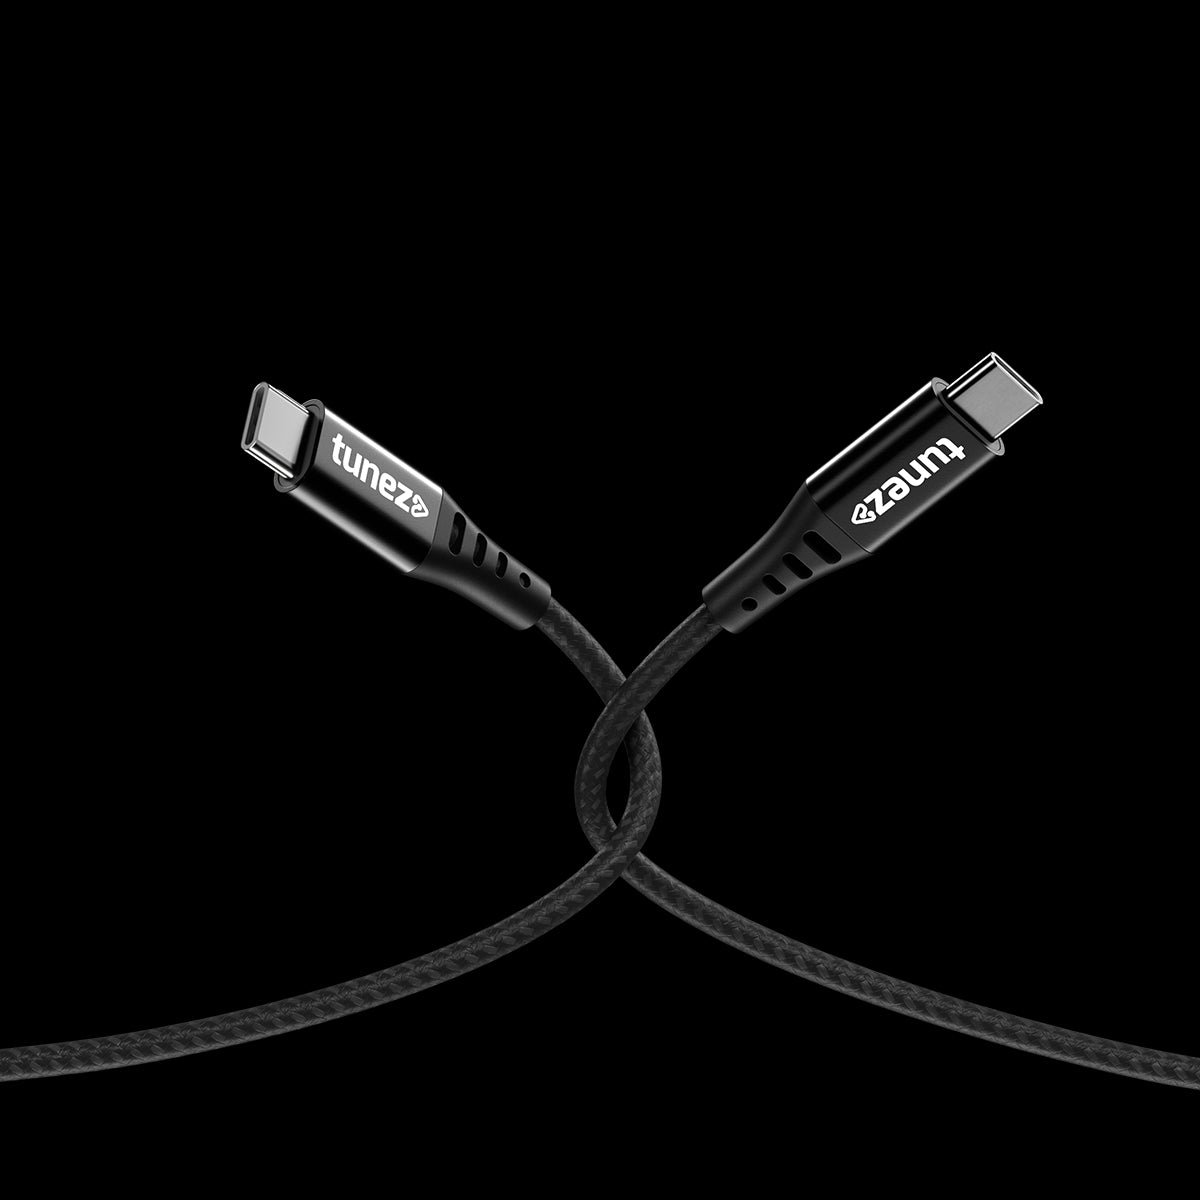 Tunez CB-20 Fast Charging Type C to C Data Cable